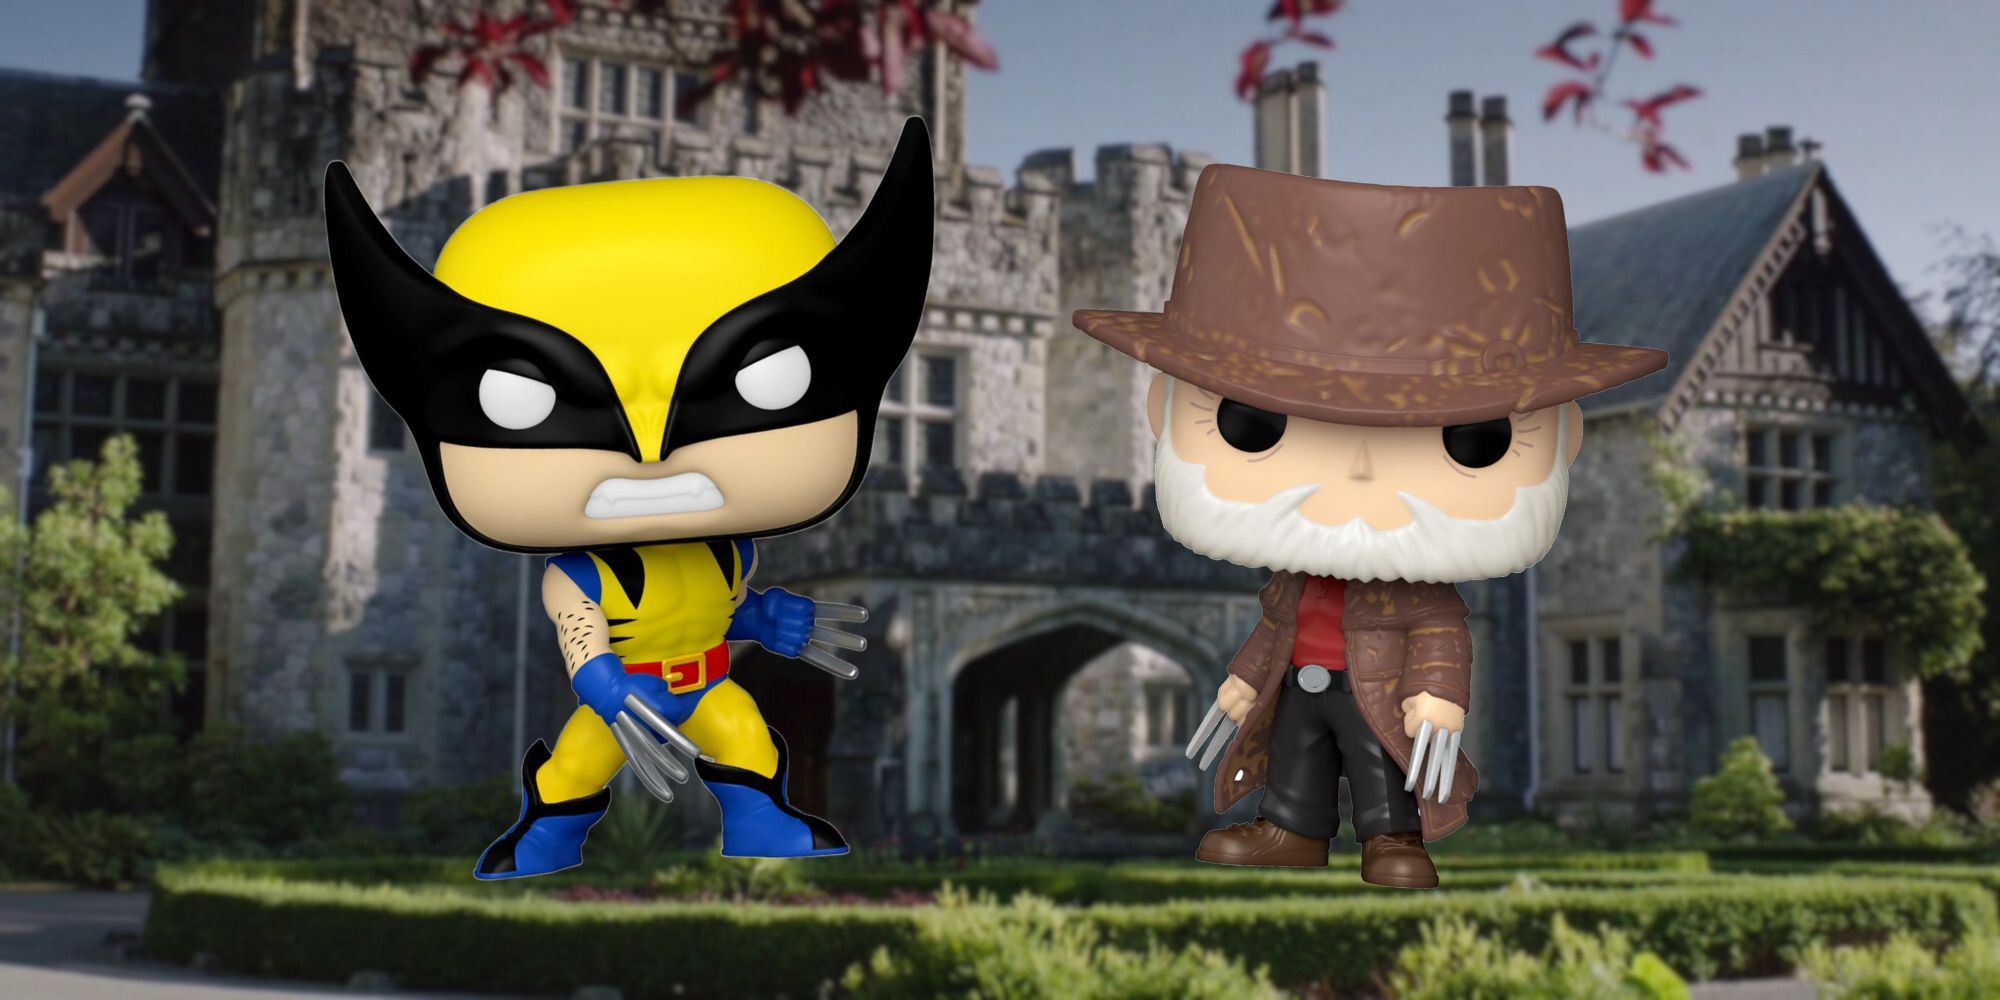 Best Wolverine Funko Pops Featured Image Classic Wolverine and Old Man Logan Funko Pops in front of X-Mansion